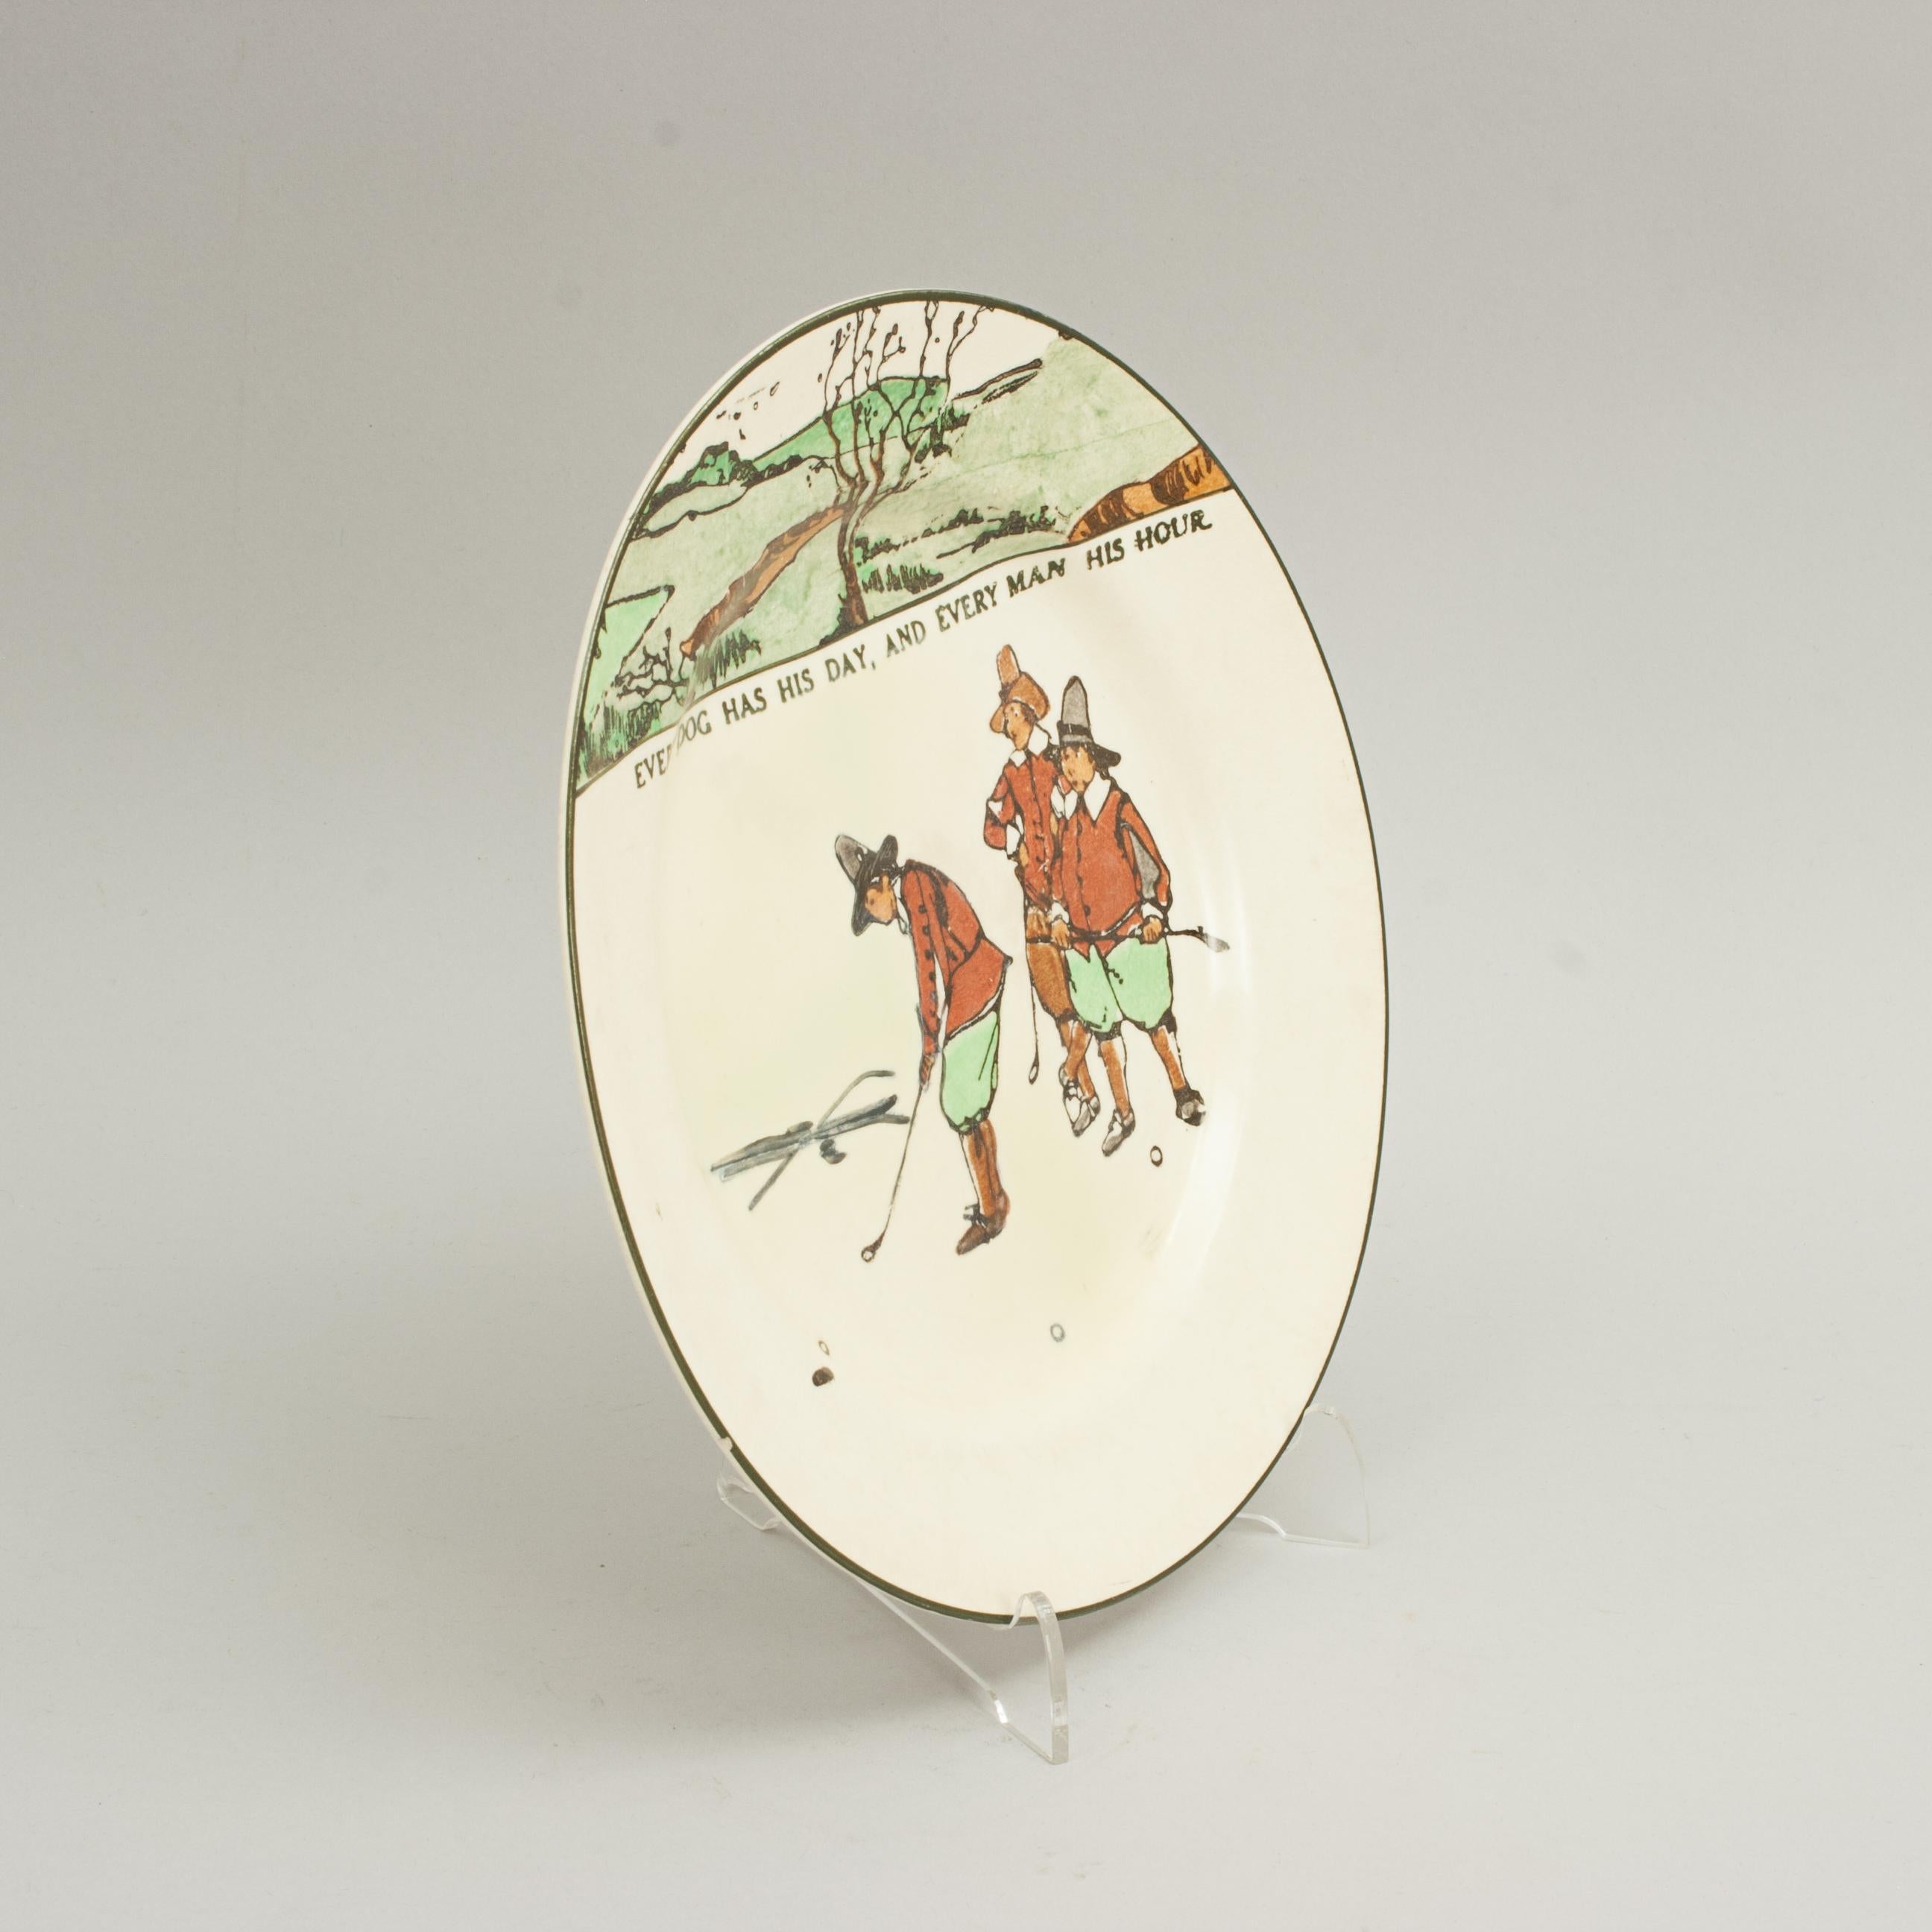 Royal Doulton Series Ware Golf plate.
Royal Doulton rack plate with polychrome golf scene and the proverb, 